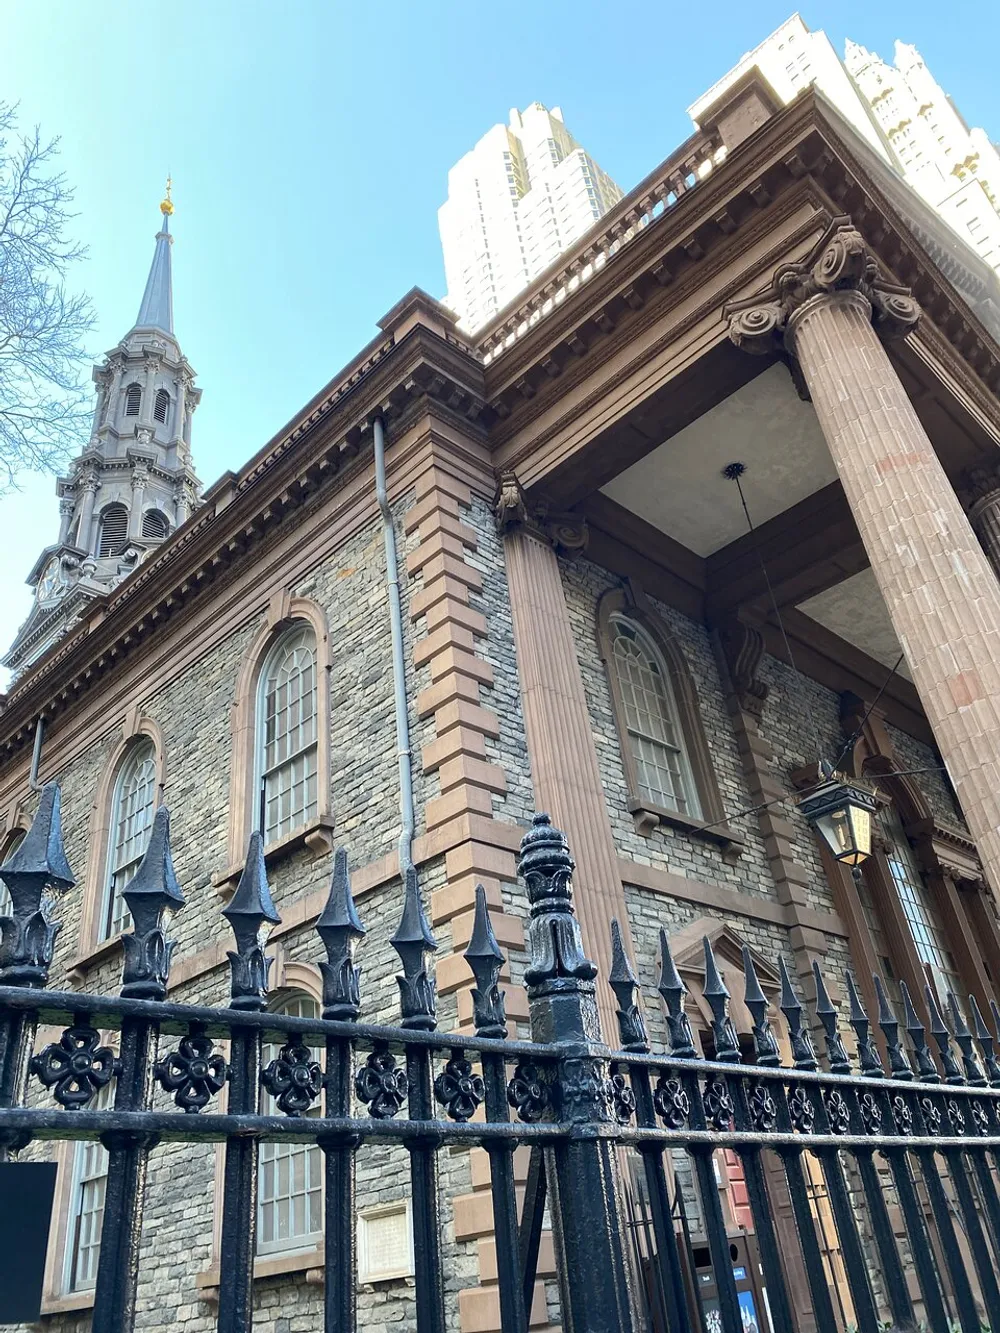 The image shows a historical building with classic architectural details and a wrought iron fence juxtaposed against a modern skyscraper in the background